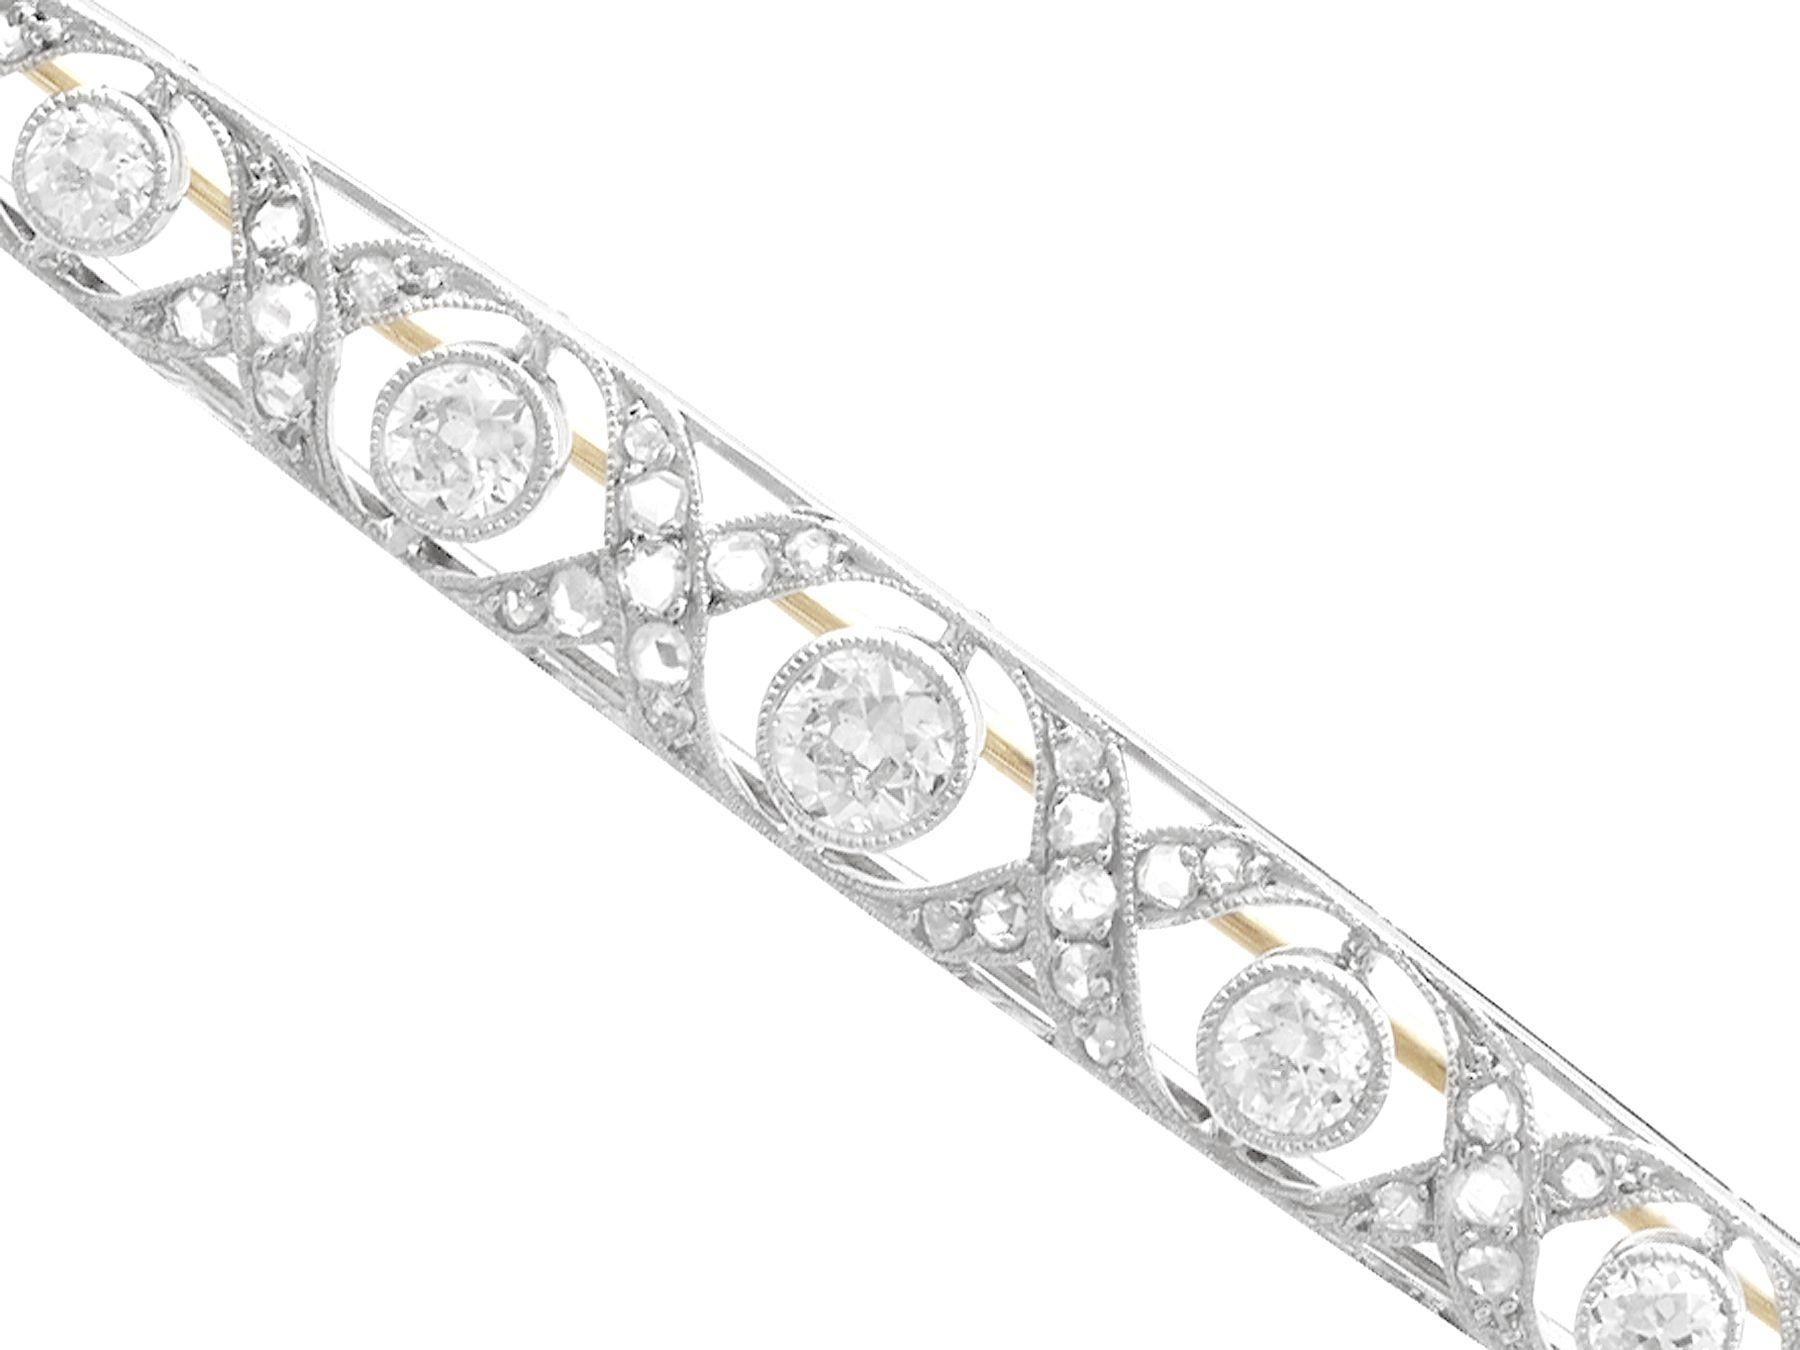 An exceptional, fine and impressive antique French 2.06 carat diamond and platinum brooch; part of our antique jewelry and estate jewelry collections.

This exceptional antique French brooch has been crafted in platinum with an 18k yellow gold